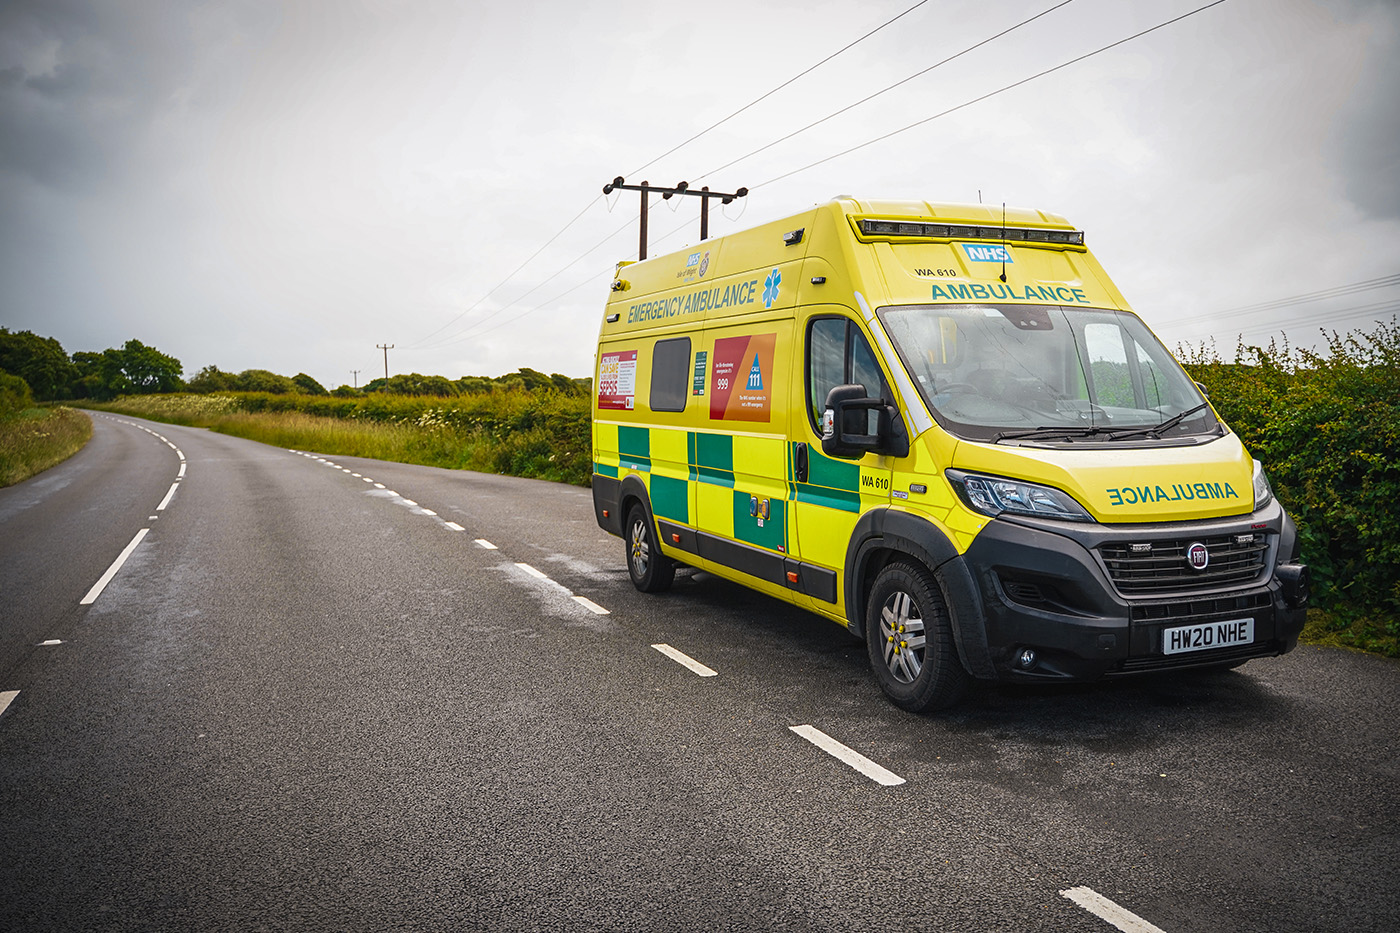 Jersey Ambulance Service has chosen Ortivus’ solutions to support their prehospital care